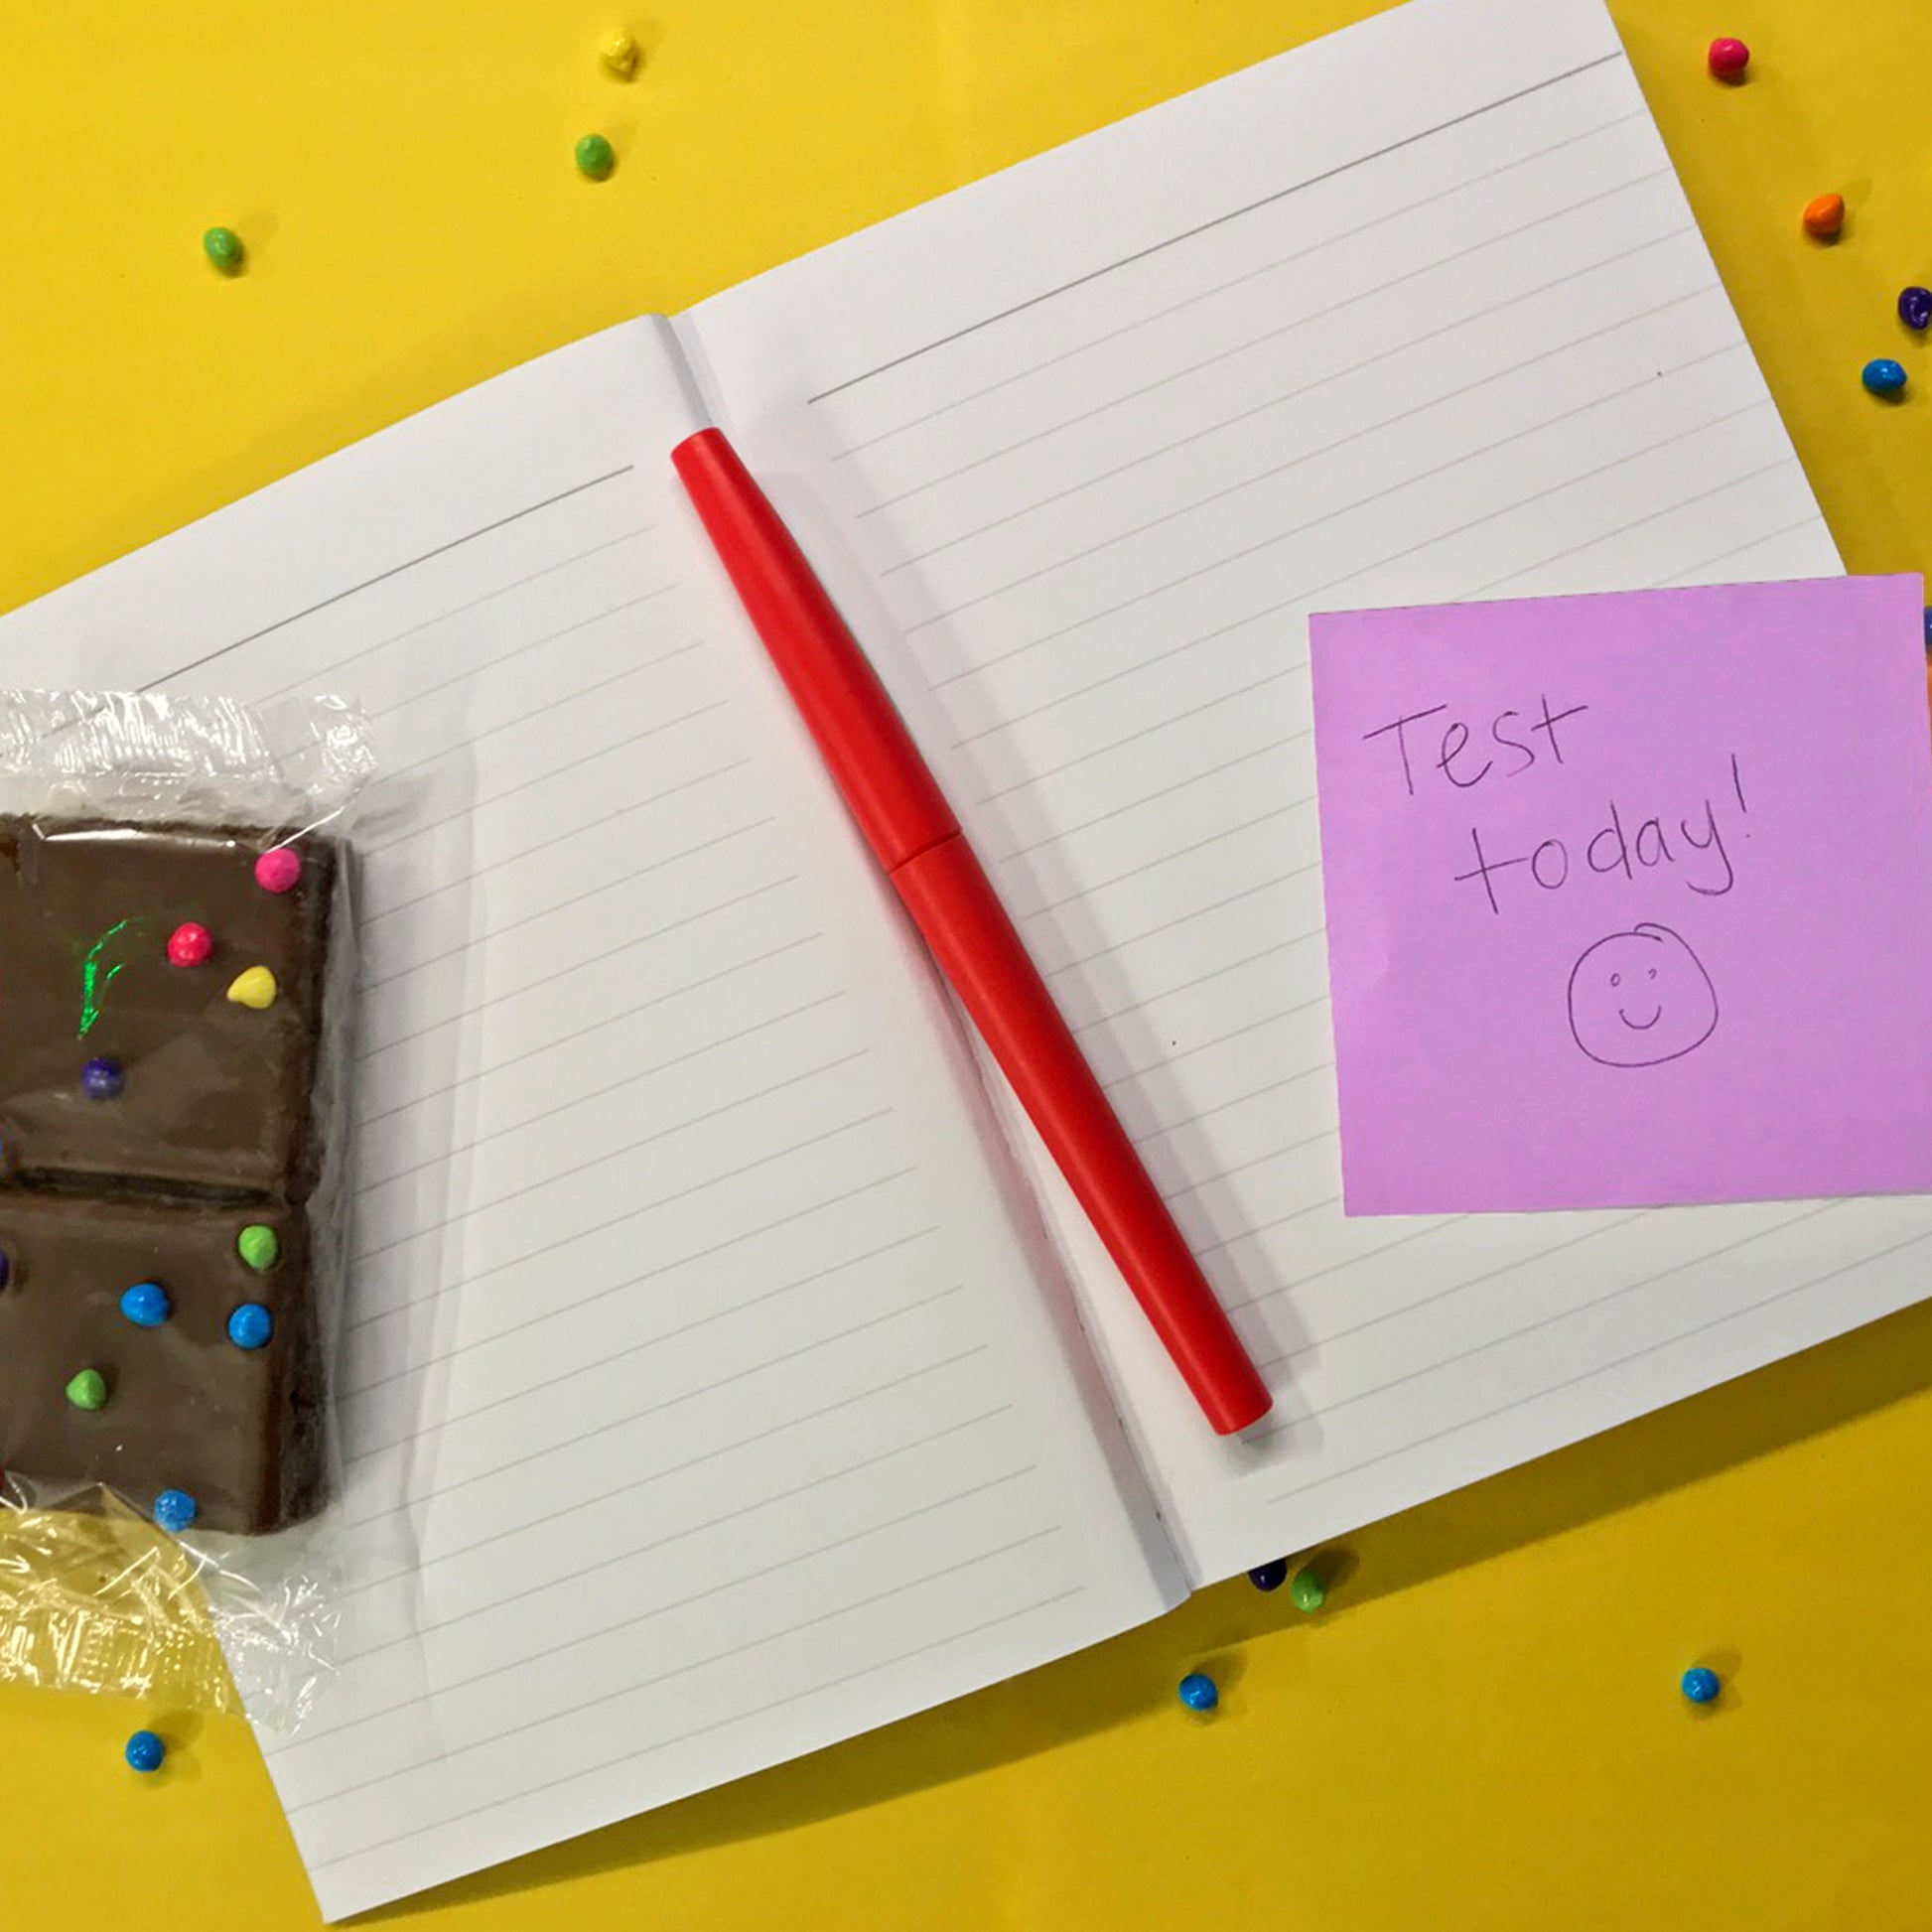 Little Debbie® Cosmic® Brownies Journal open on yellow background with a sticky note, a red pen and a Cosmic® Brownie on lined paper.